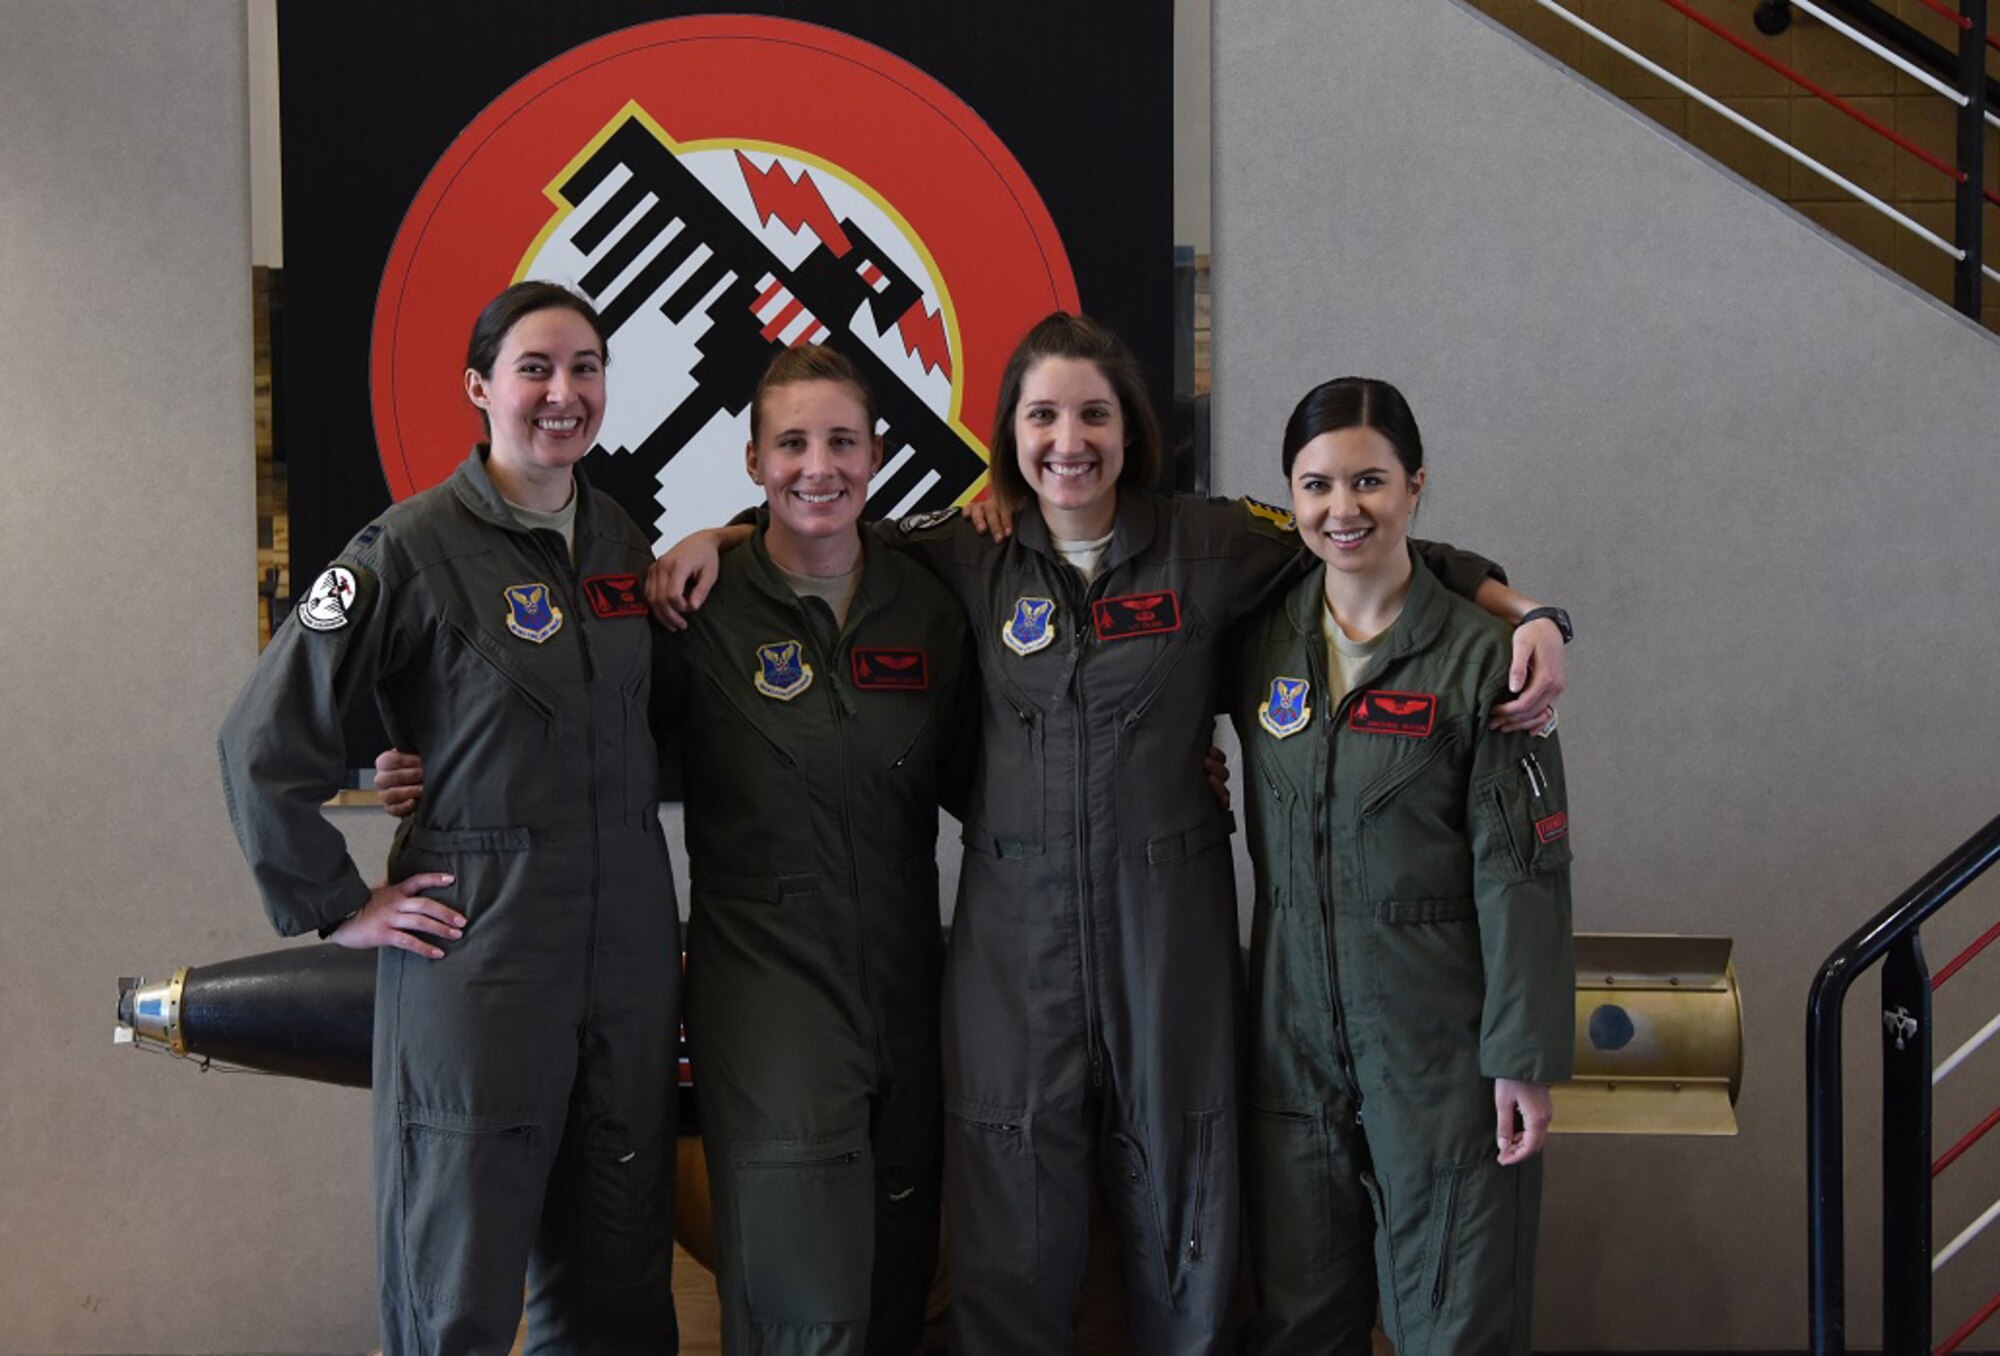 Members of the 34th Bomb Squadron, Capt. Lillian Pryor, a B-1 pilot; Capt. Danielle Zidack, a weapon systems officer; Capt. Lauren Olme, a B-1 pilot; and 1st Lt. Kimberly Auton, a weapon systems officer, stand together prior to conducting an all-female flight out of Ellsworth Air Force Base, S.D., March 21, 2018. The flight was in honor of Women’s History Month and consisted of routine training in the local area. (U.S. Air Force photo by Staff Sgt. Jette Carr)